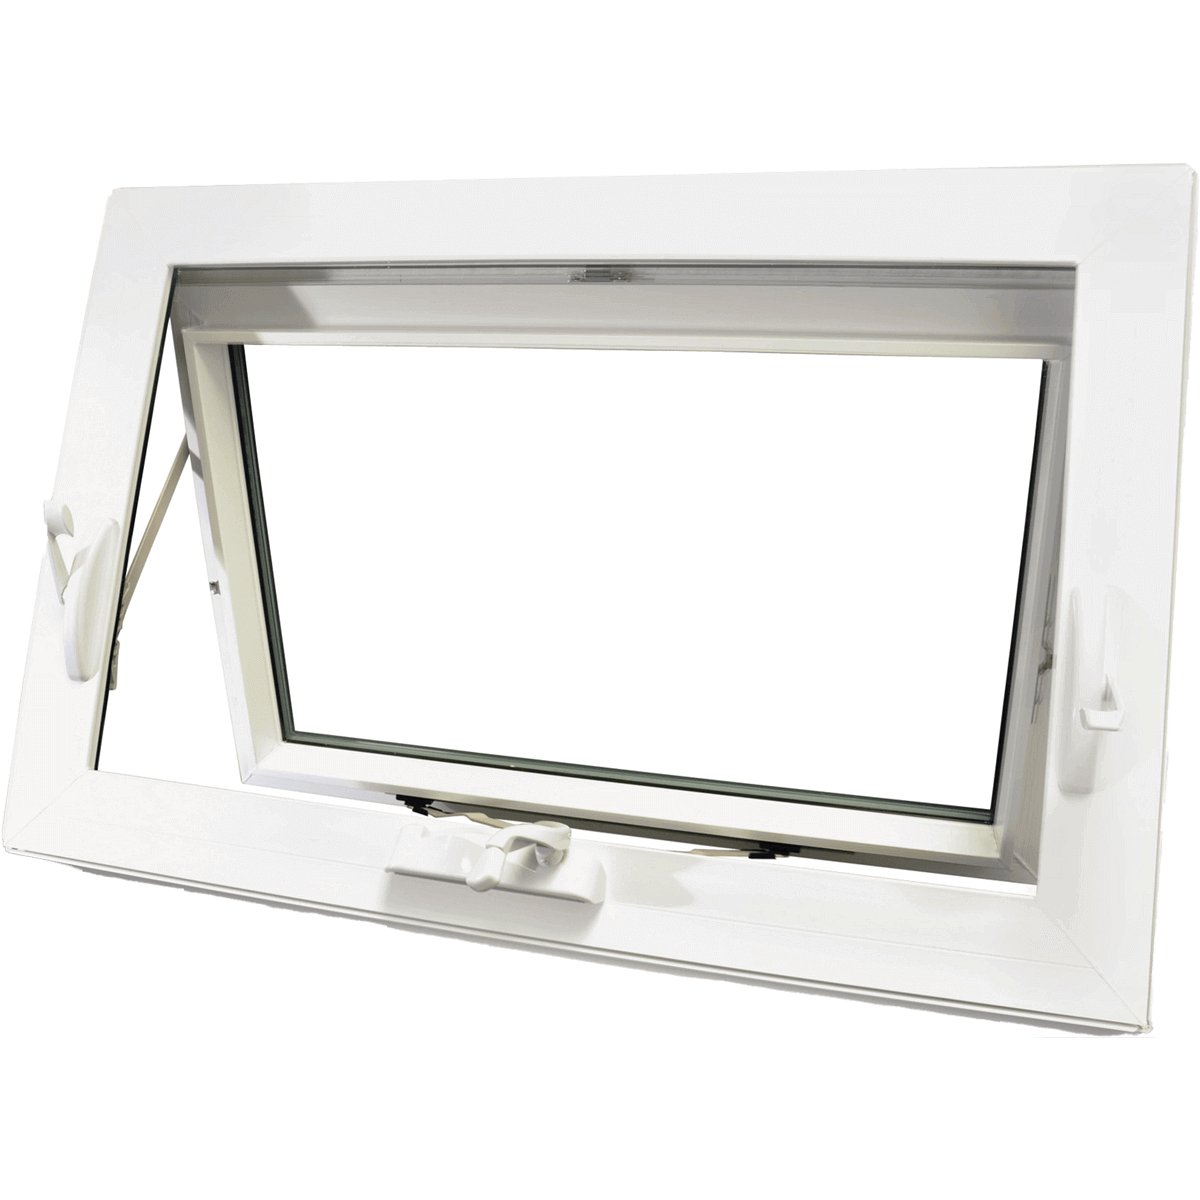 Awning windows are hinged at the top and open outwards from the bottom, creating a slightly tilted canopy to allow ventilation even in rainy weather.